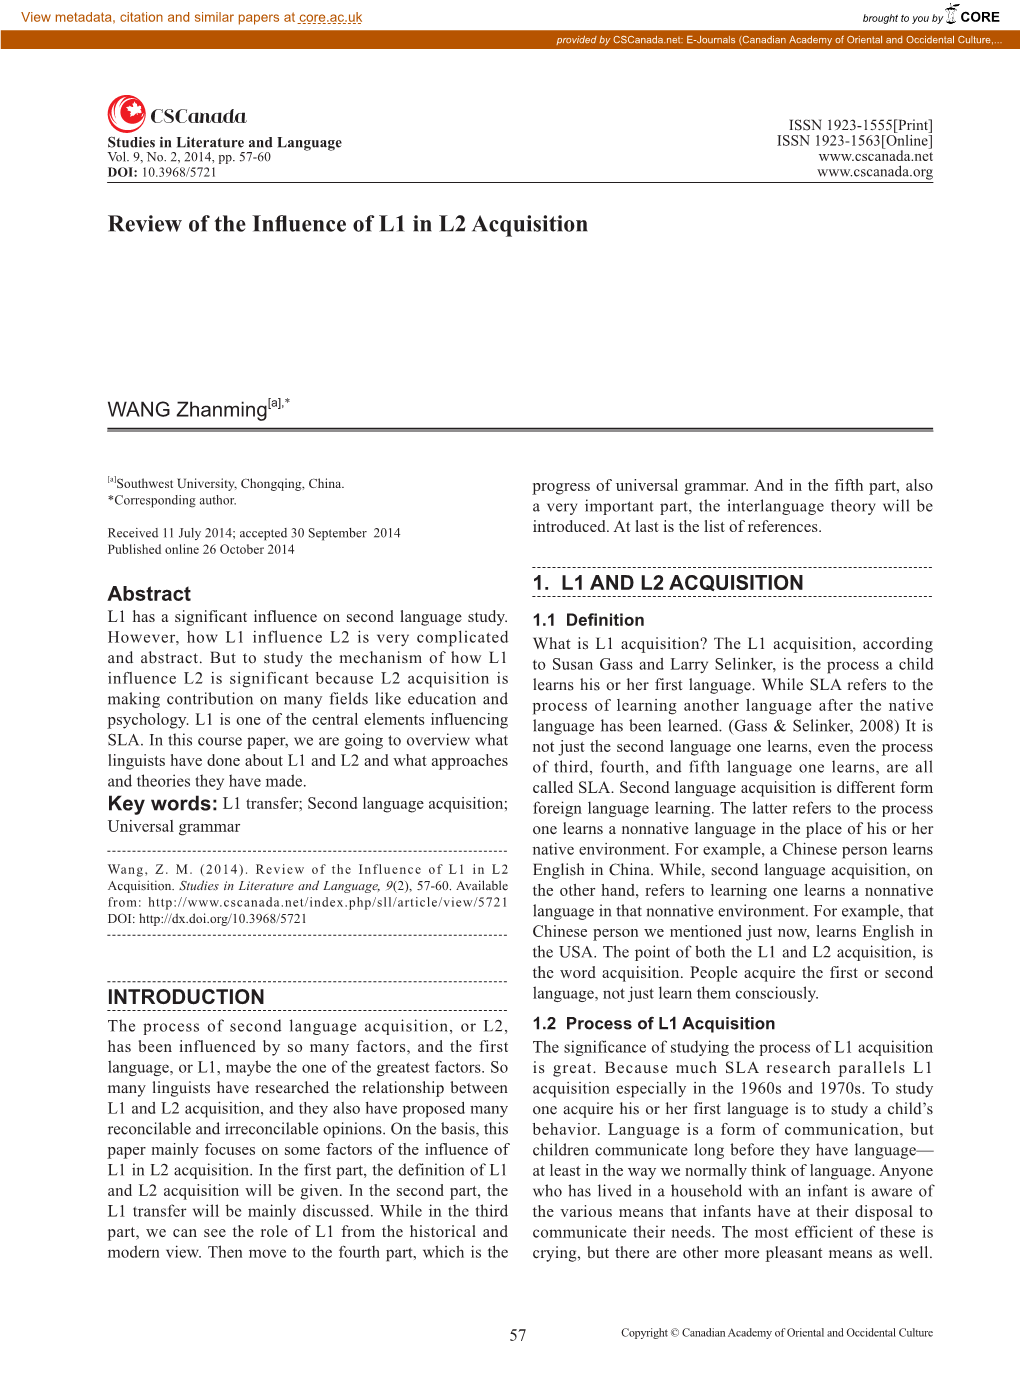 Review of the Influence of L1 in L2 Acquisition